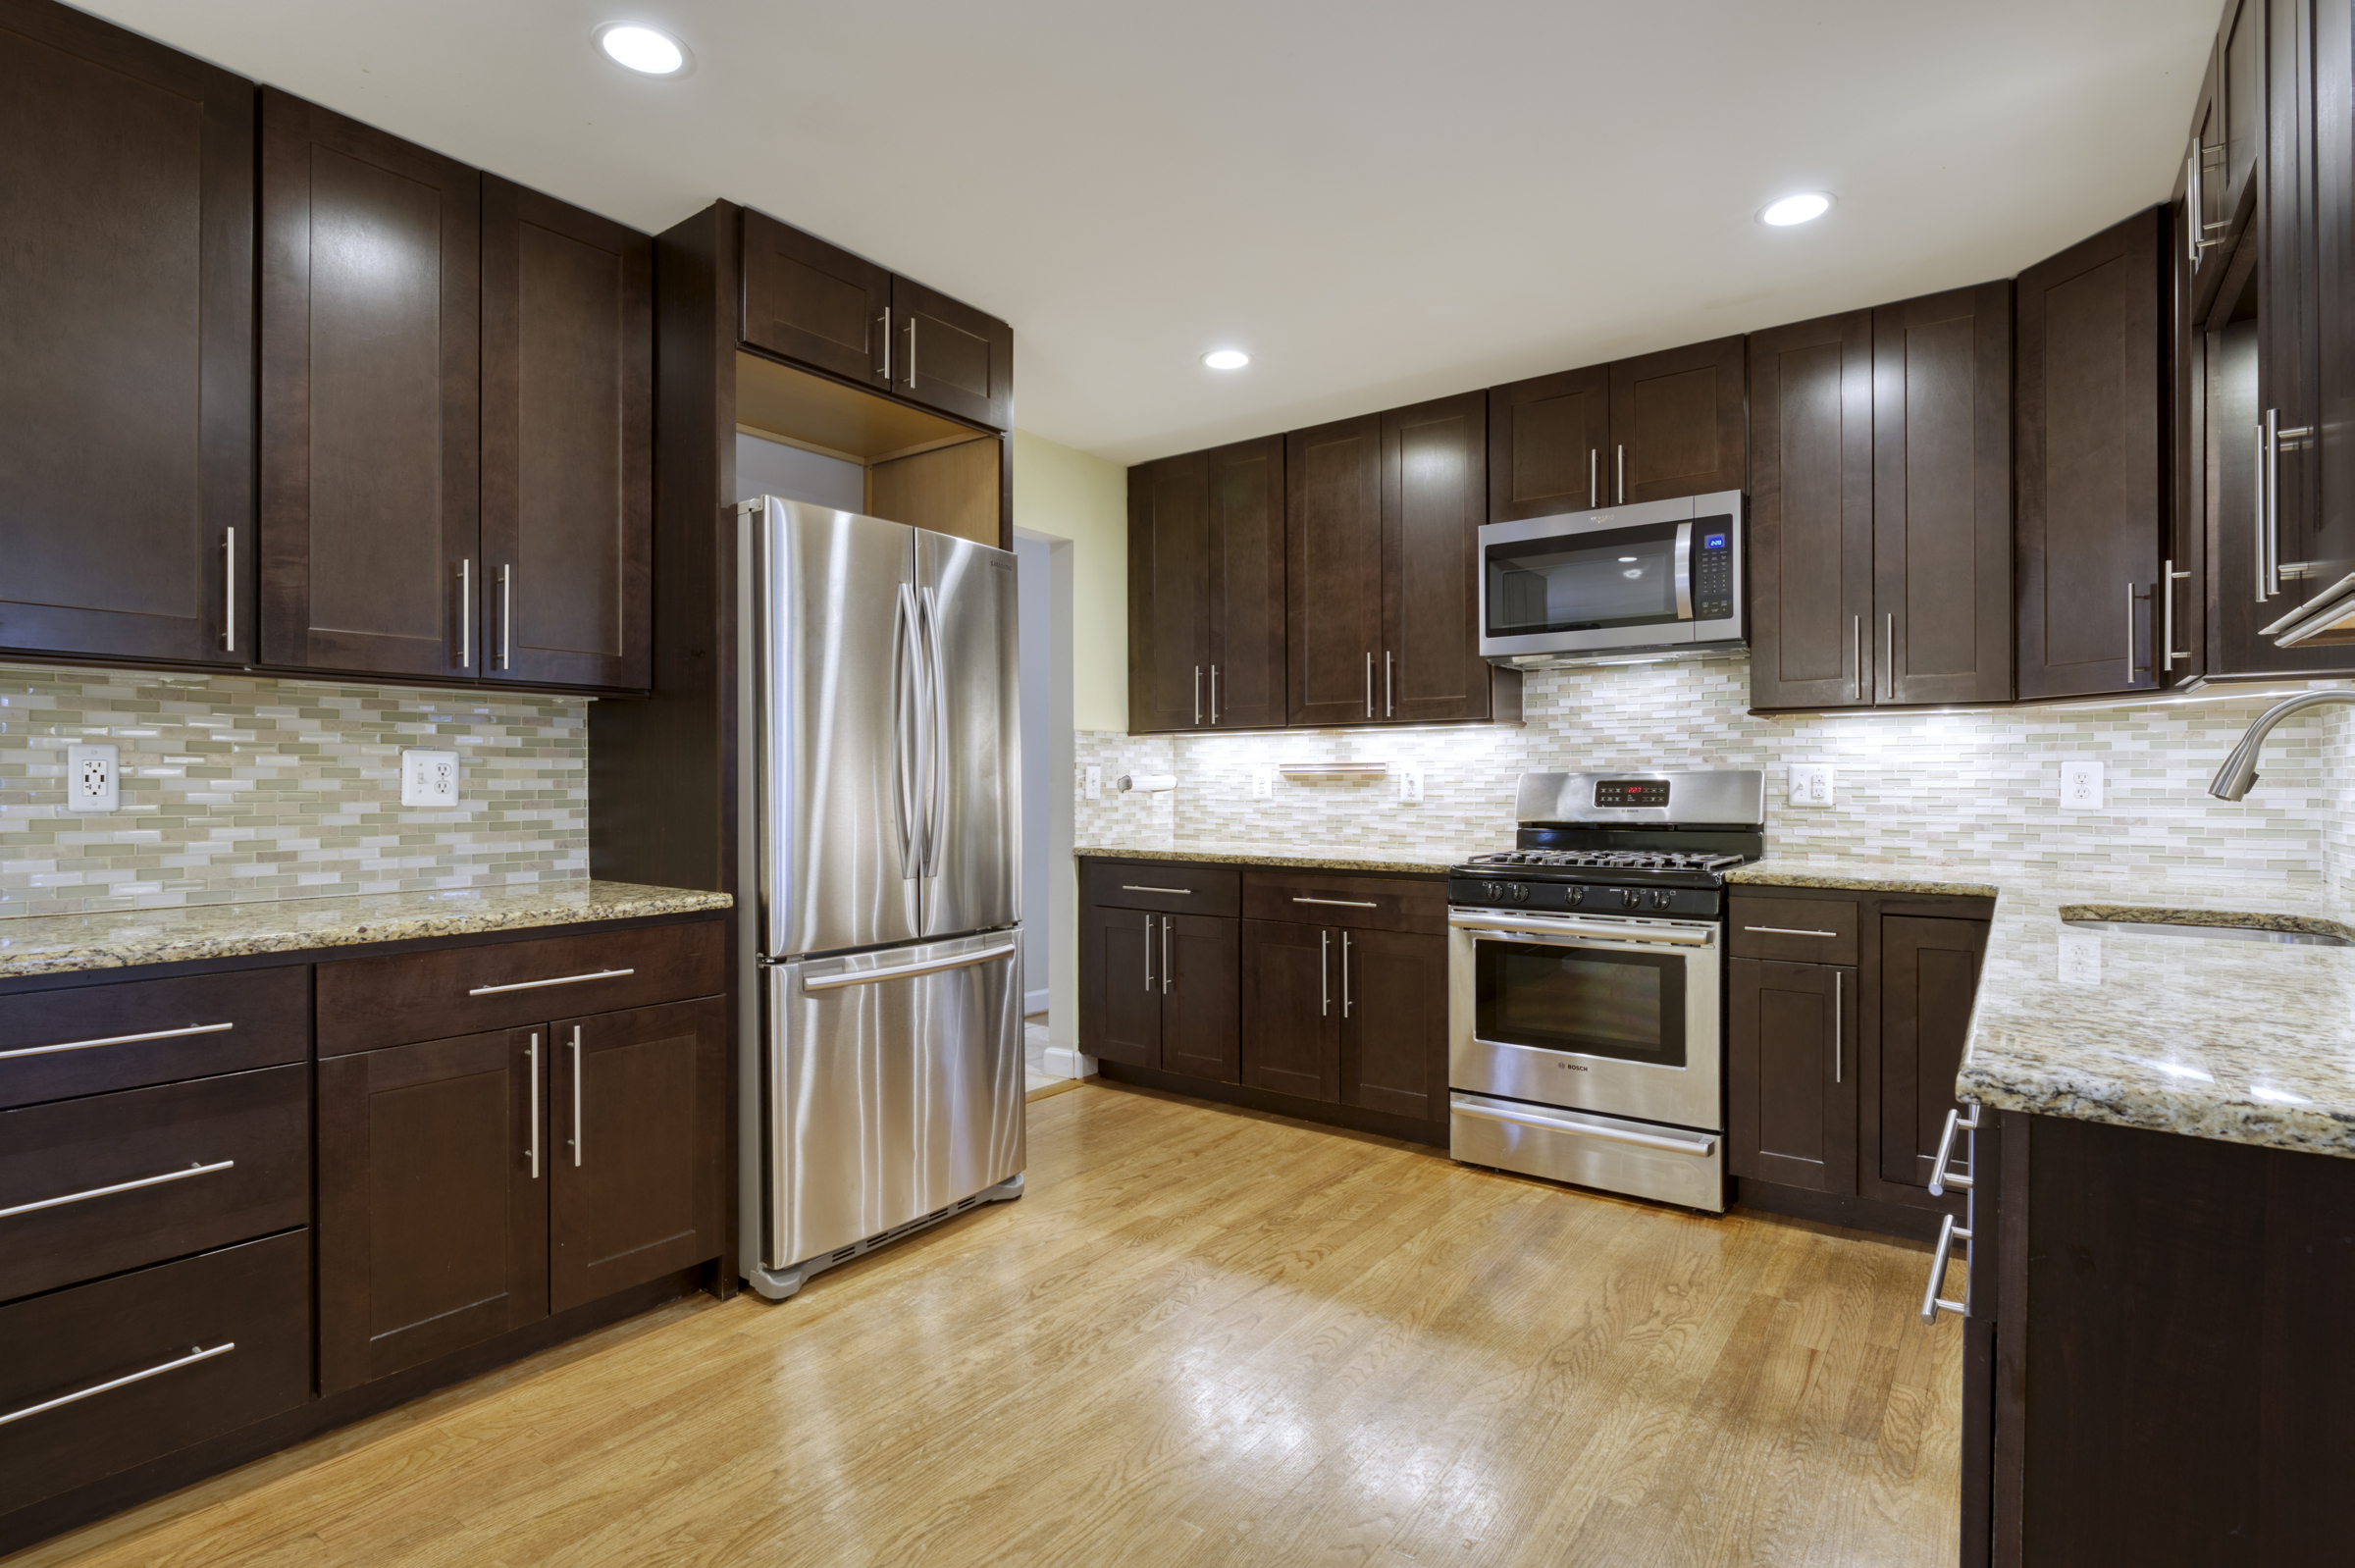 Professional interior photo of 2624 Depaul Dr in Vienna, VA - showing the remodeled kitchen with dark cabinets, stainless pulls, stainless appliances, gas range, and granite counters 